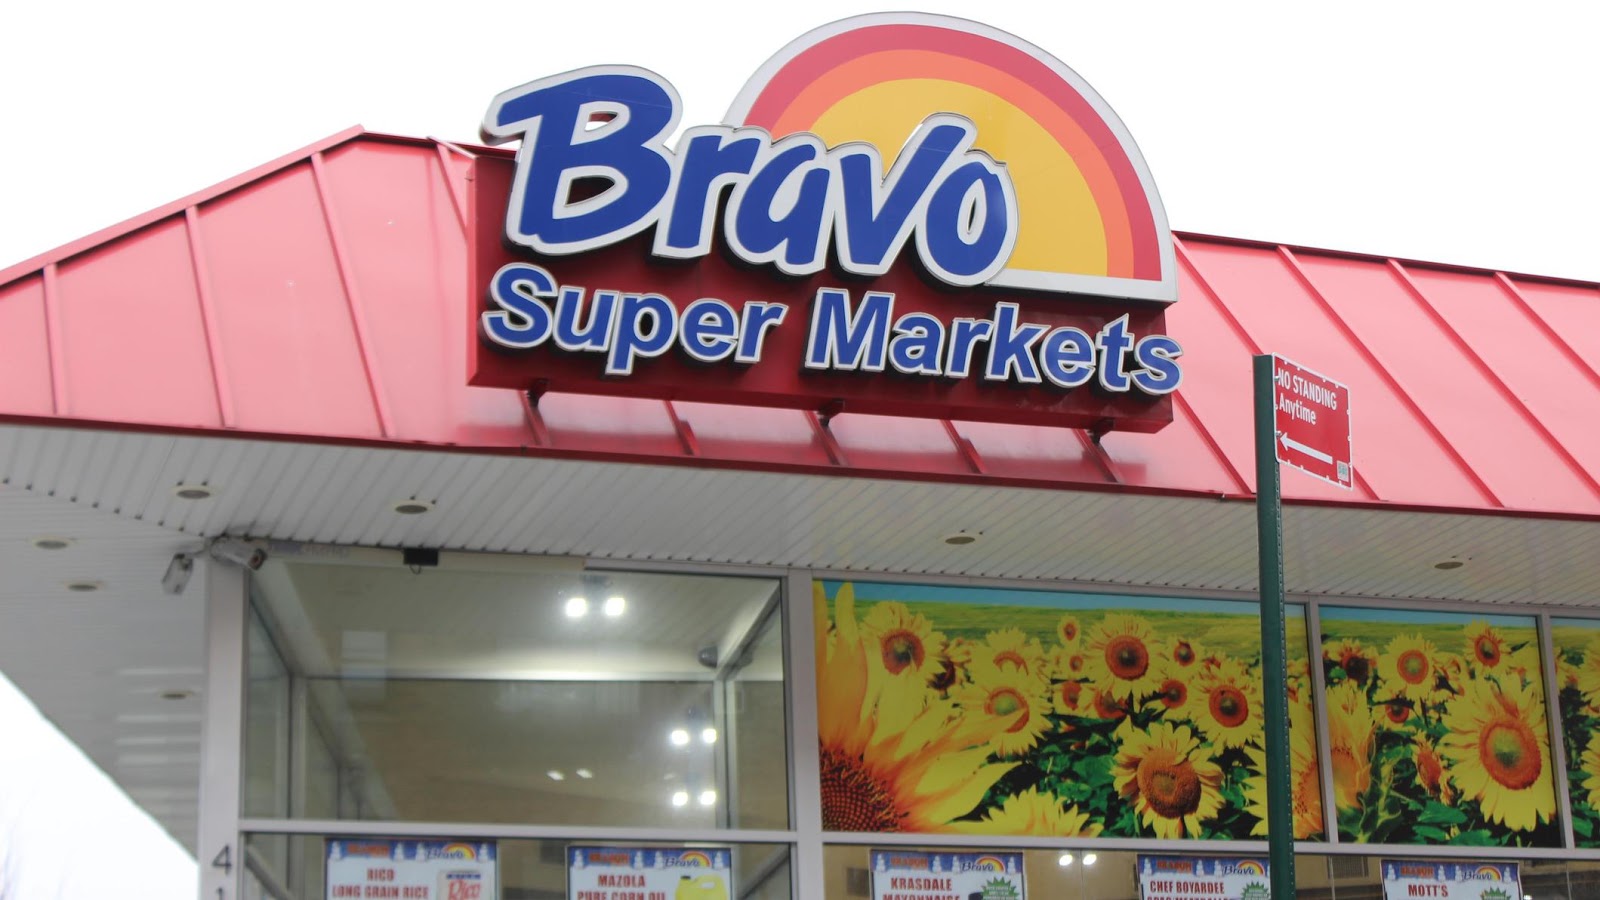 Bravo Supermarkets, Locally Owned, Grocery